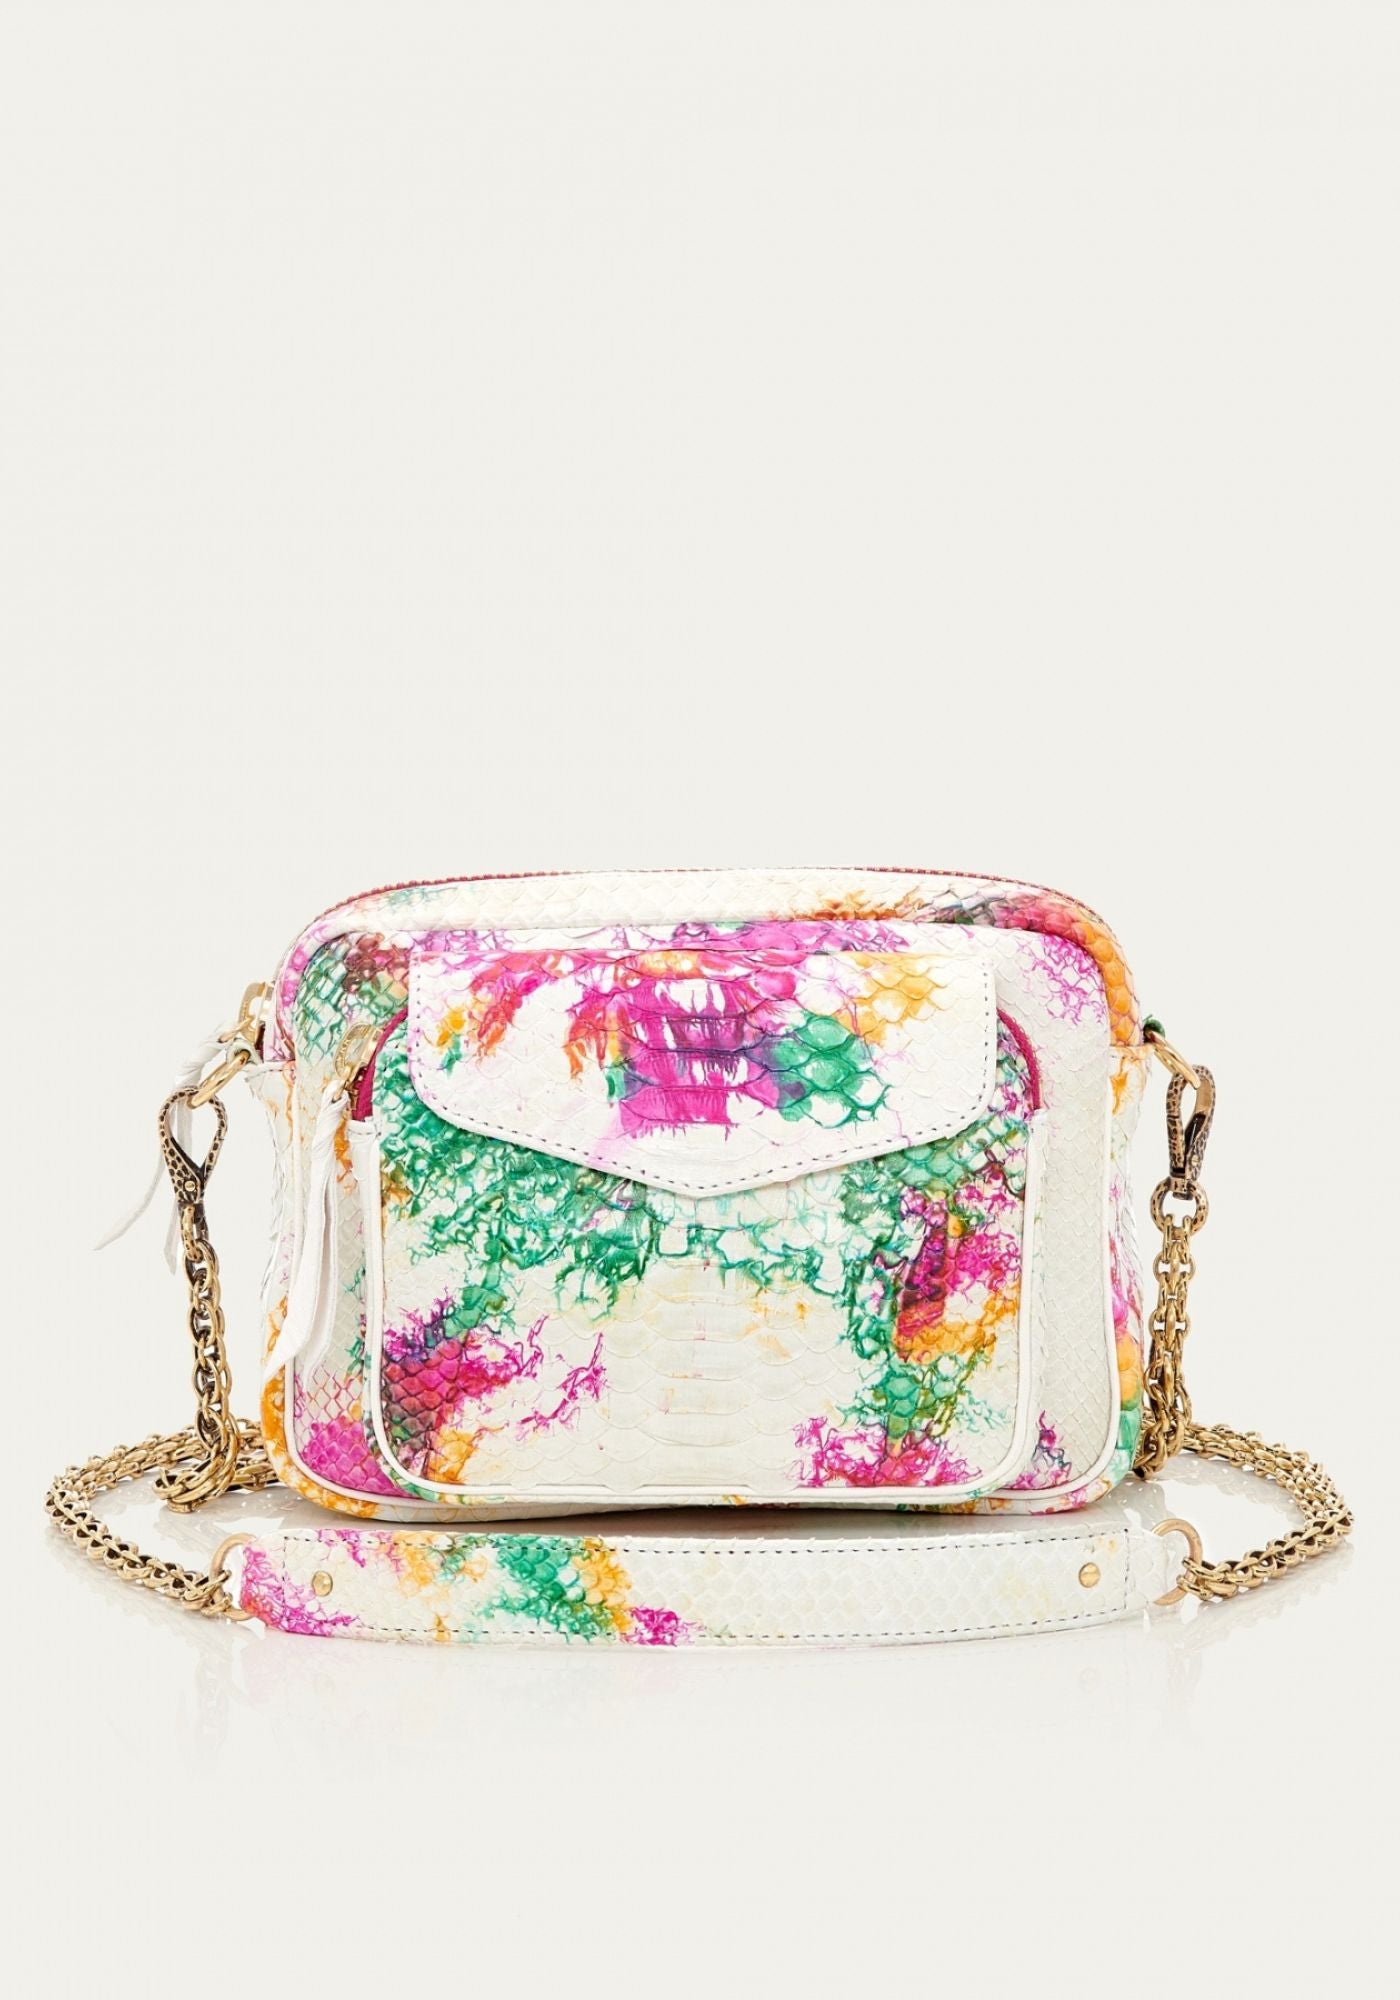 sac-charly-tie-and-dye-multicolore-claris-virot